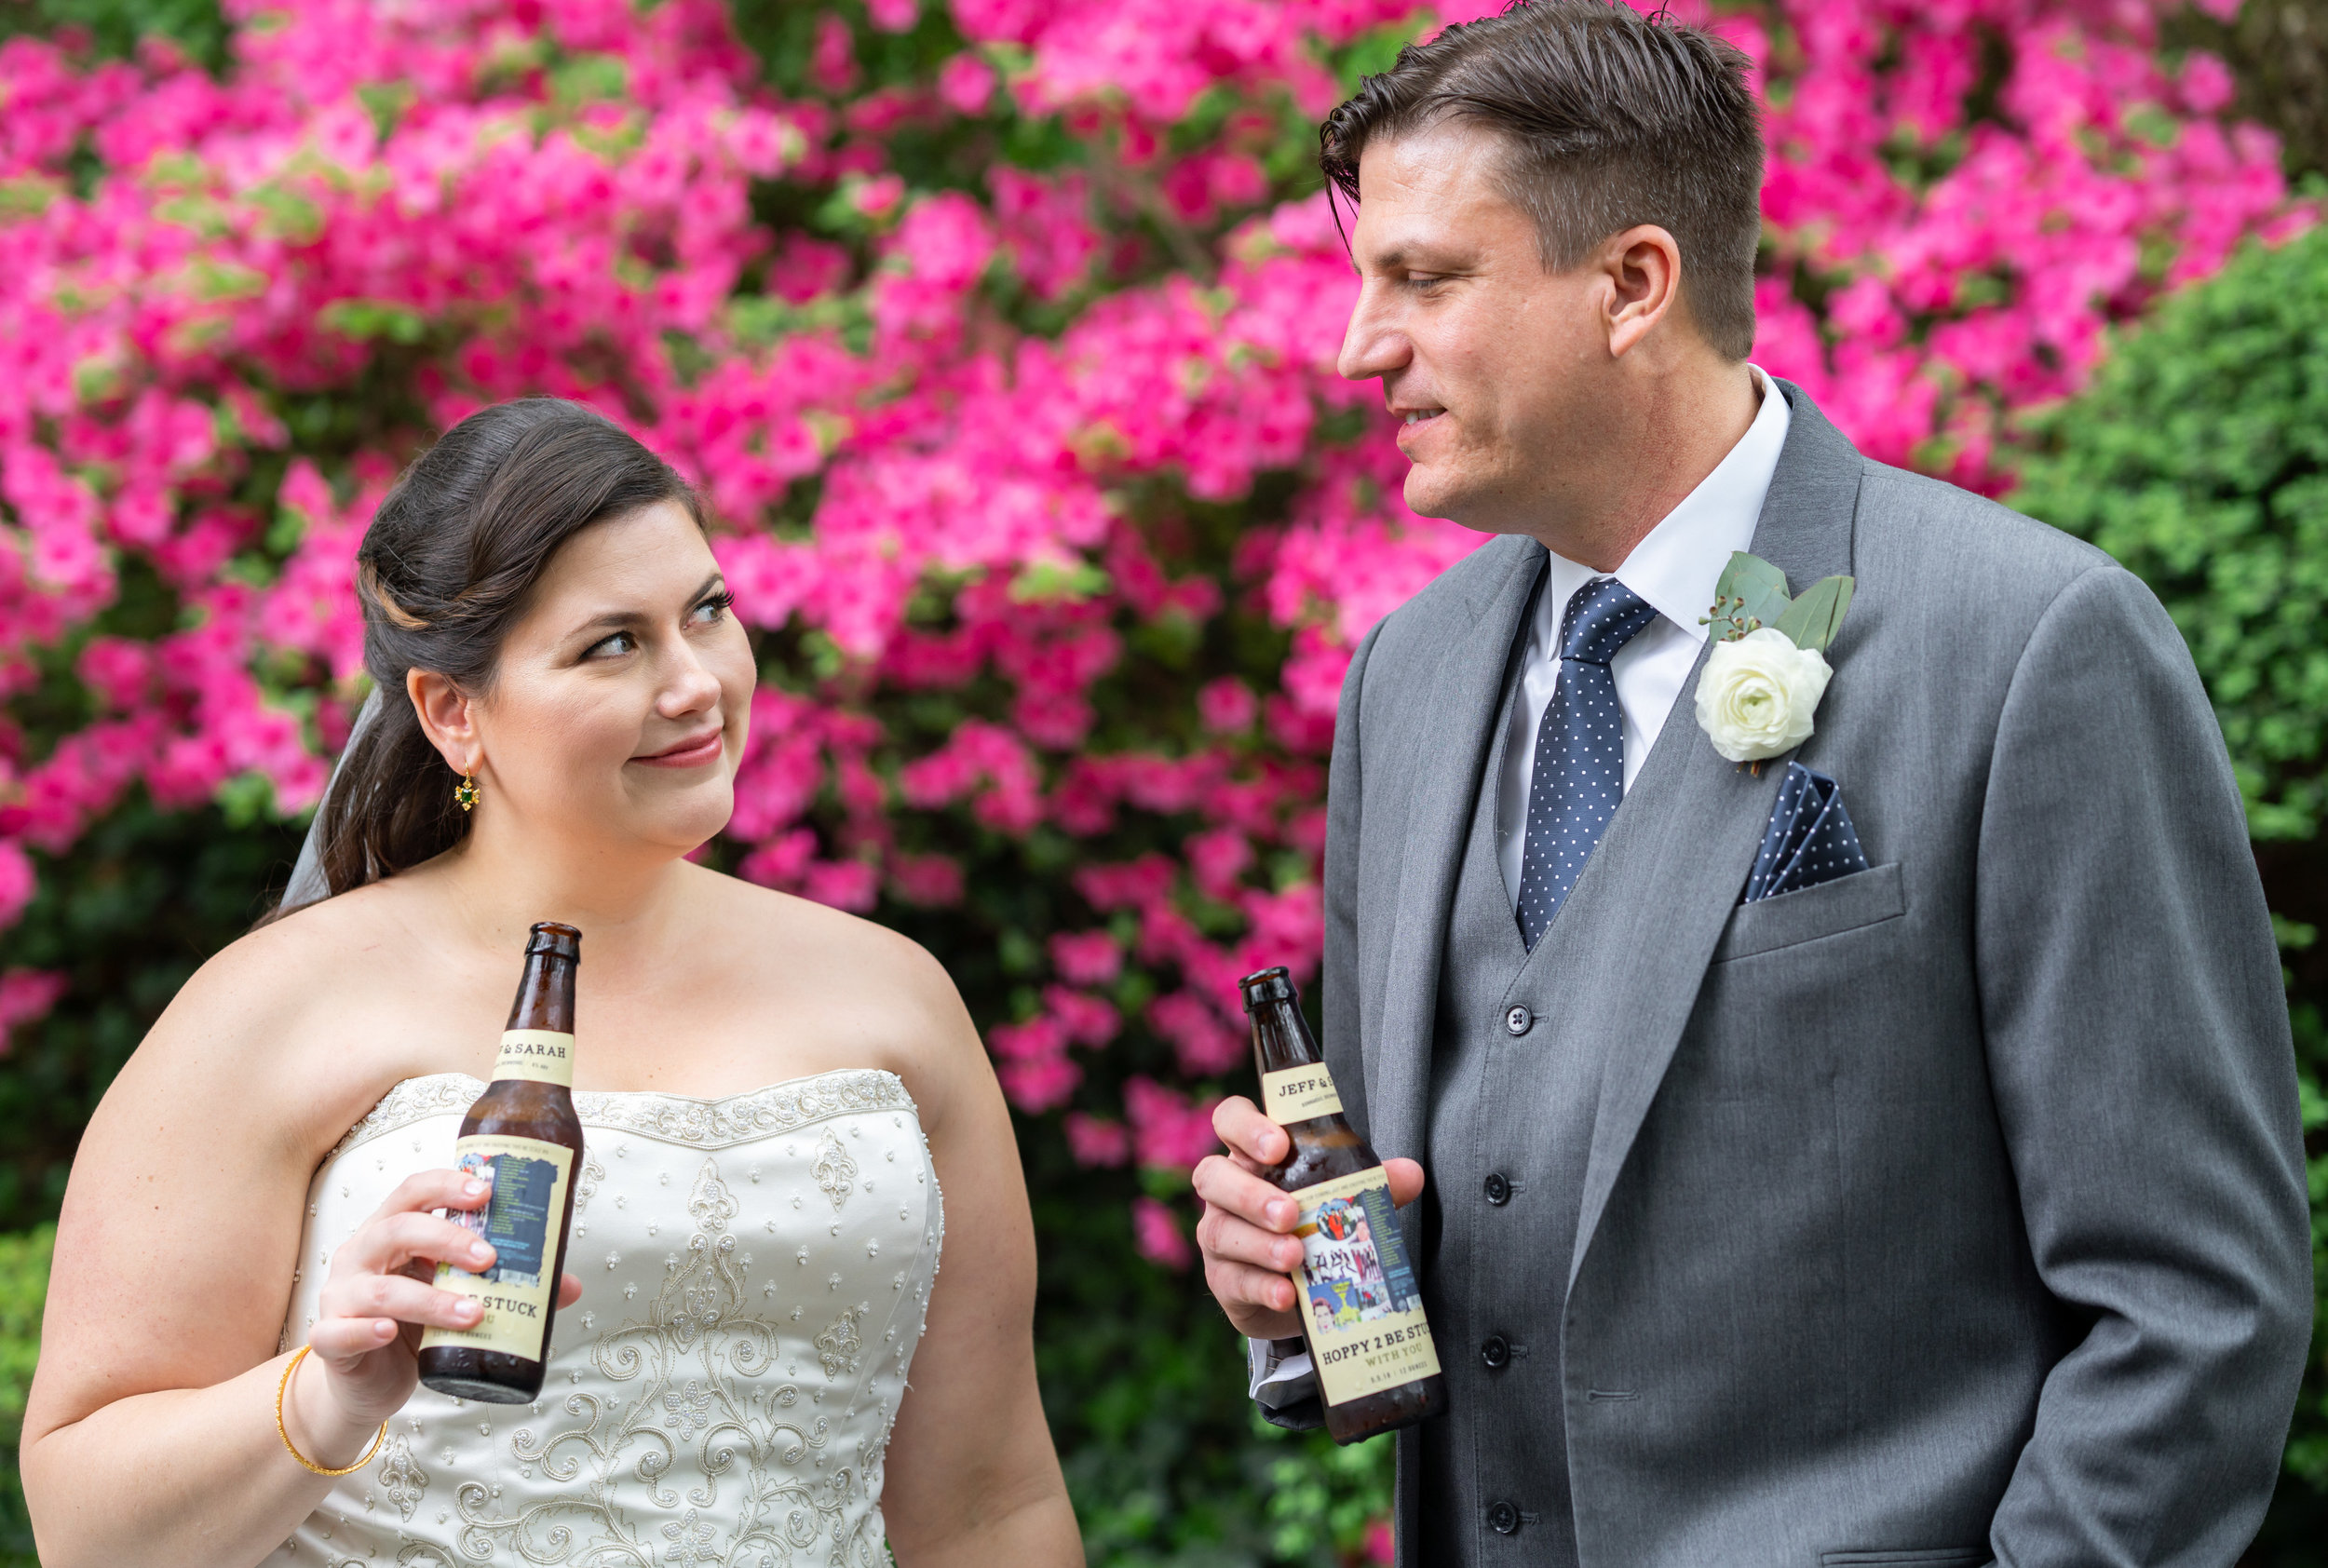 Bride and groom toasting with beer bottles with custom wedding day labels 